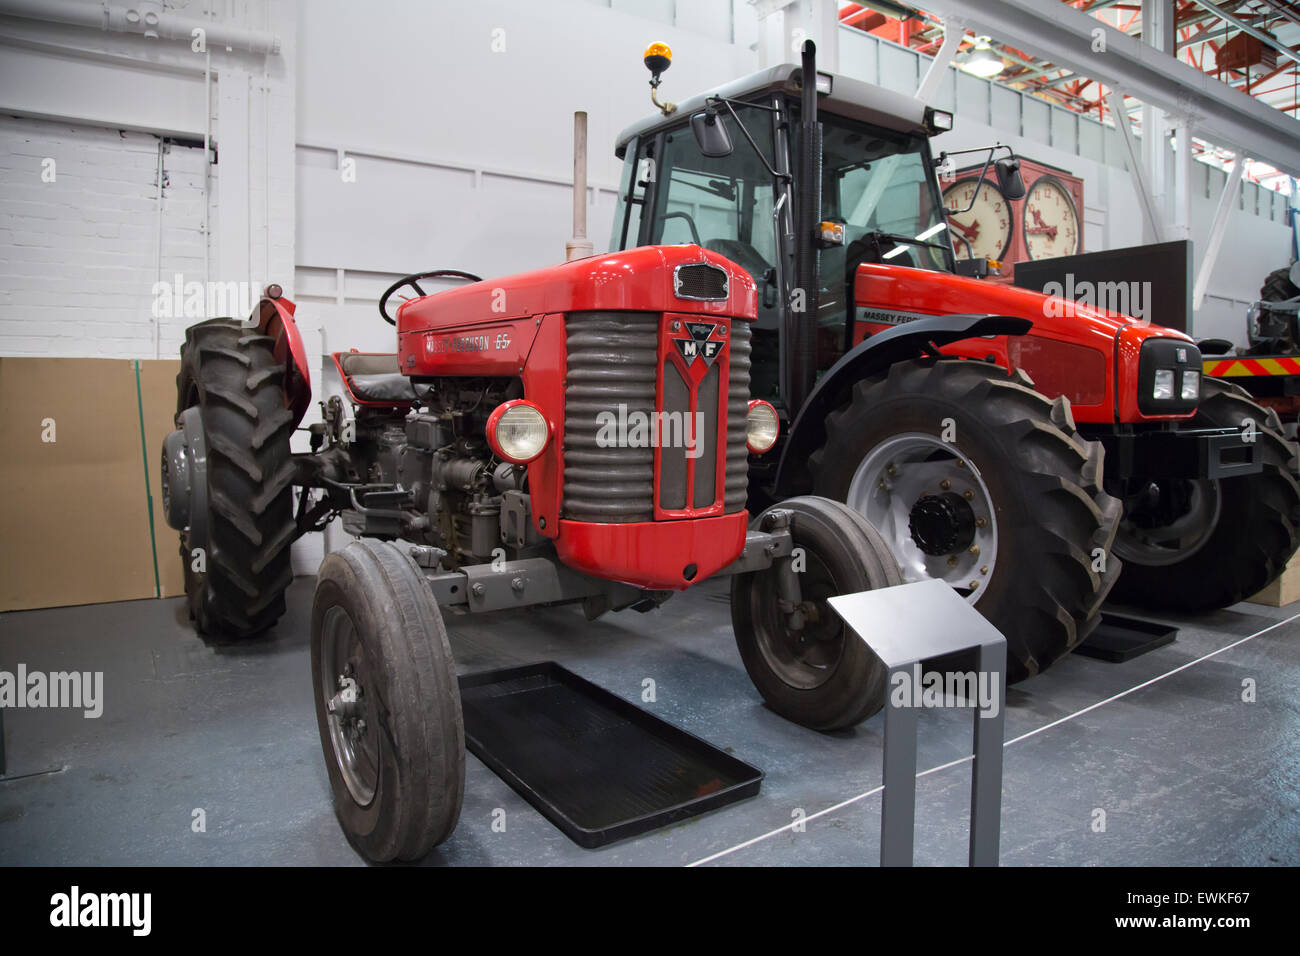 2002 Massey Ferguson tractor on display at Coventry Transport Museum alongside a vintage tractor Stock Photo